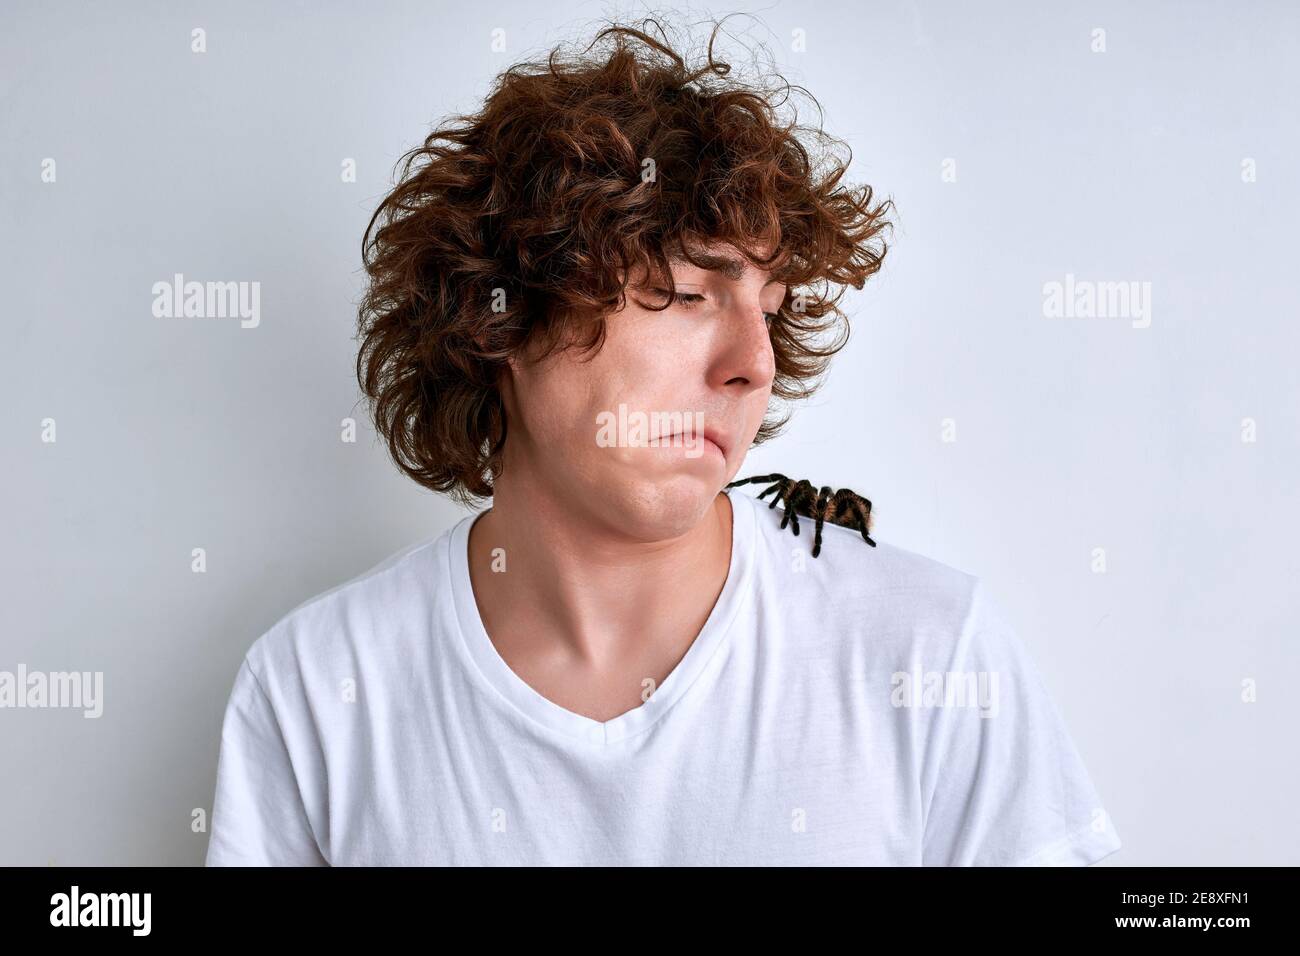 man patiently refers to a spider crawling on his shoulder, looking at it, isolated on white background Stock Photo